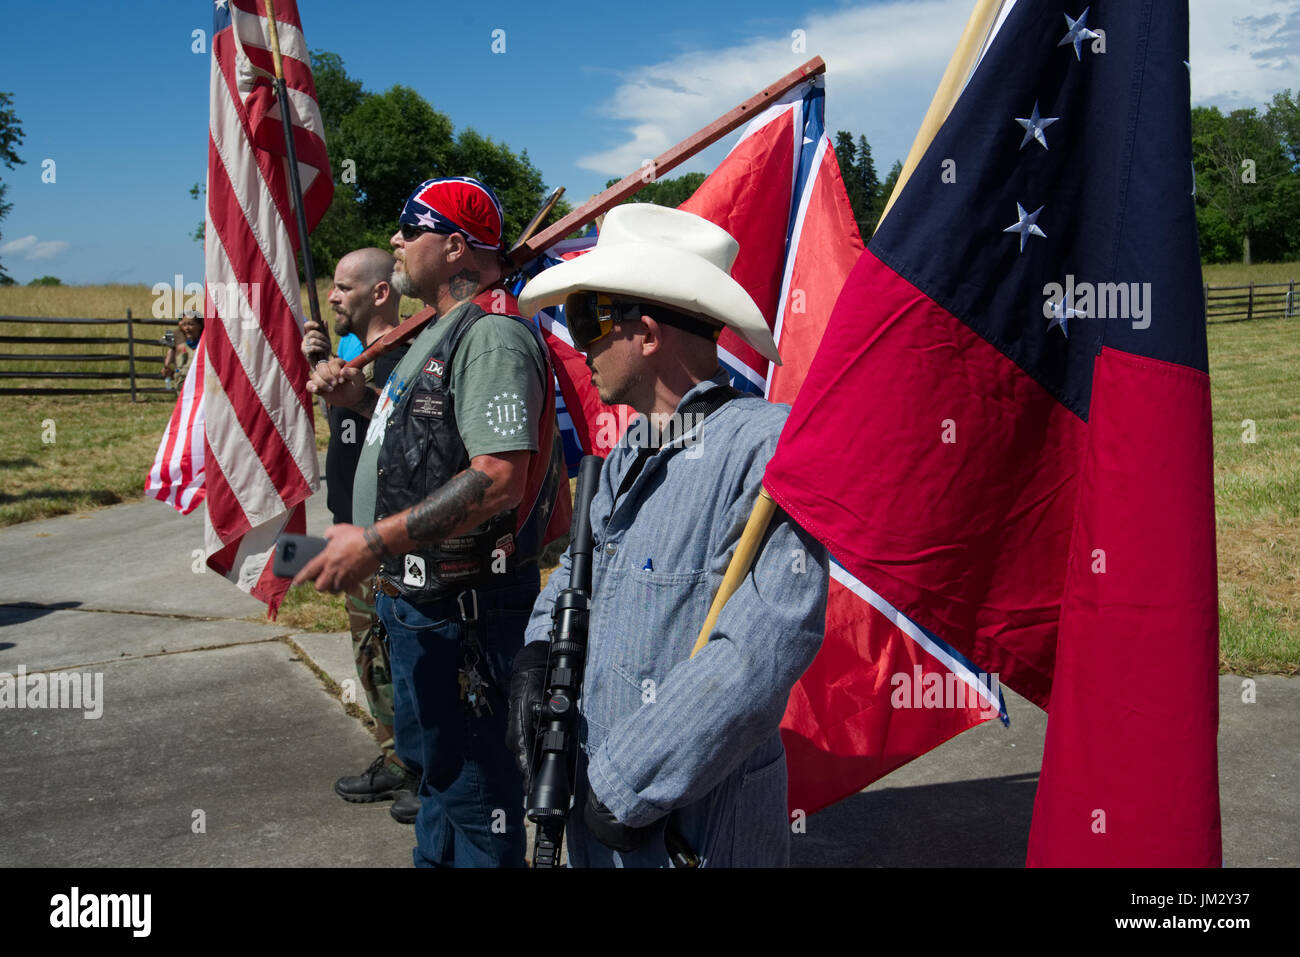 Participants carry American and Confederate flags during a patriotic free speech rally at Gettysburg National Military Park in Gettysburg, PA Stock Photo